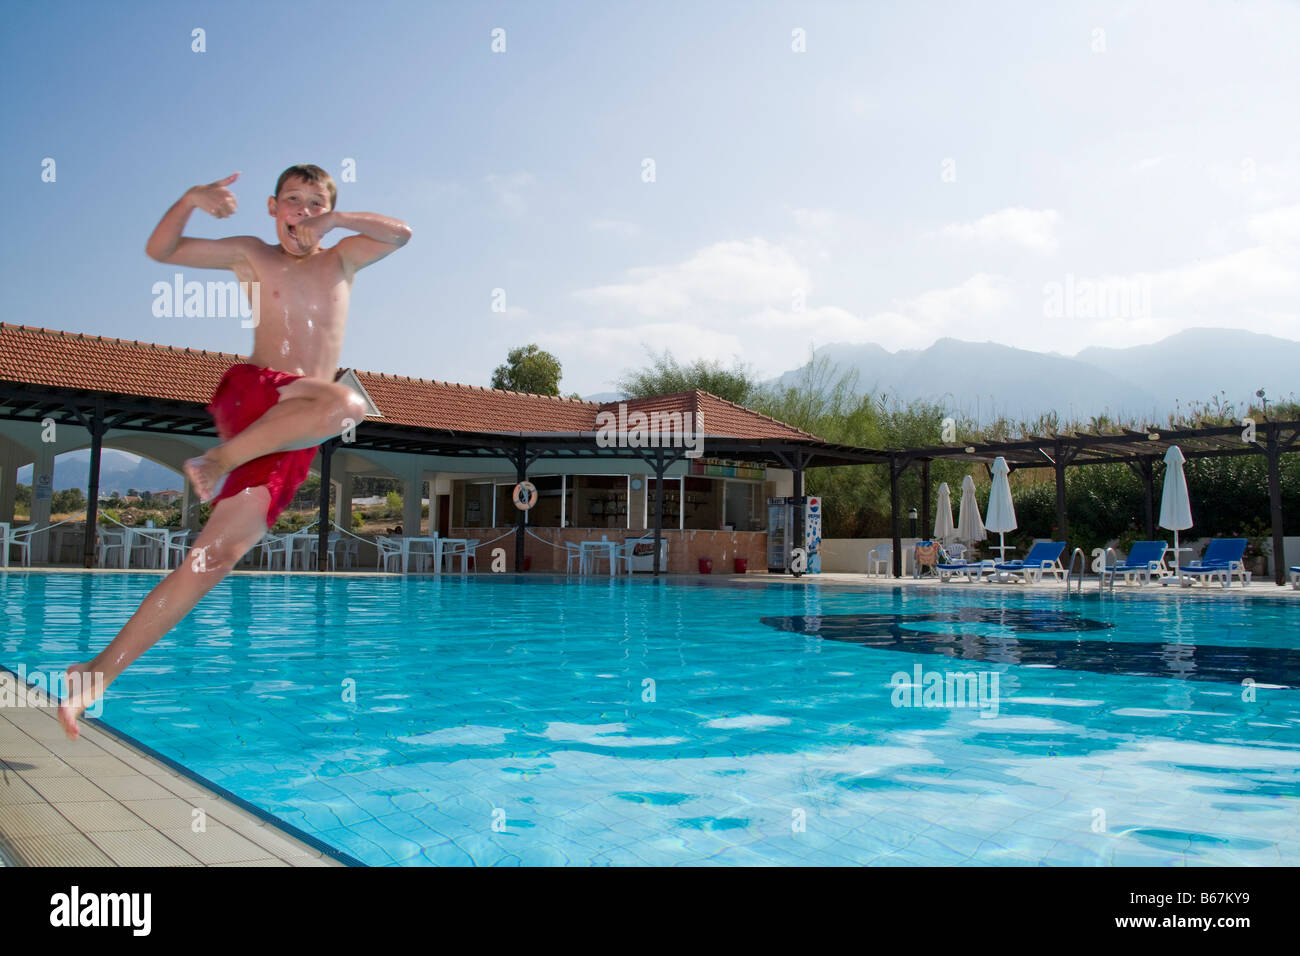 Boy in mid air jumping in swimming pool Stock Photo